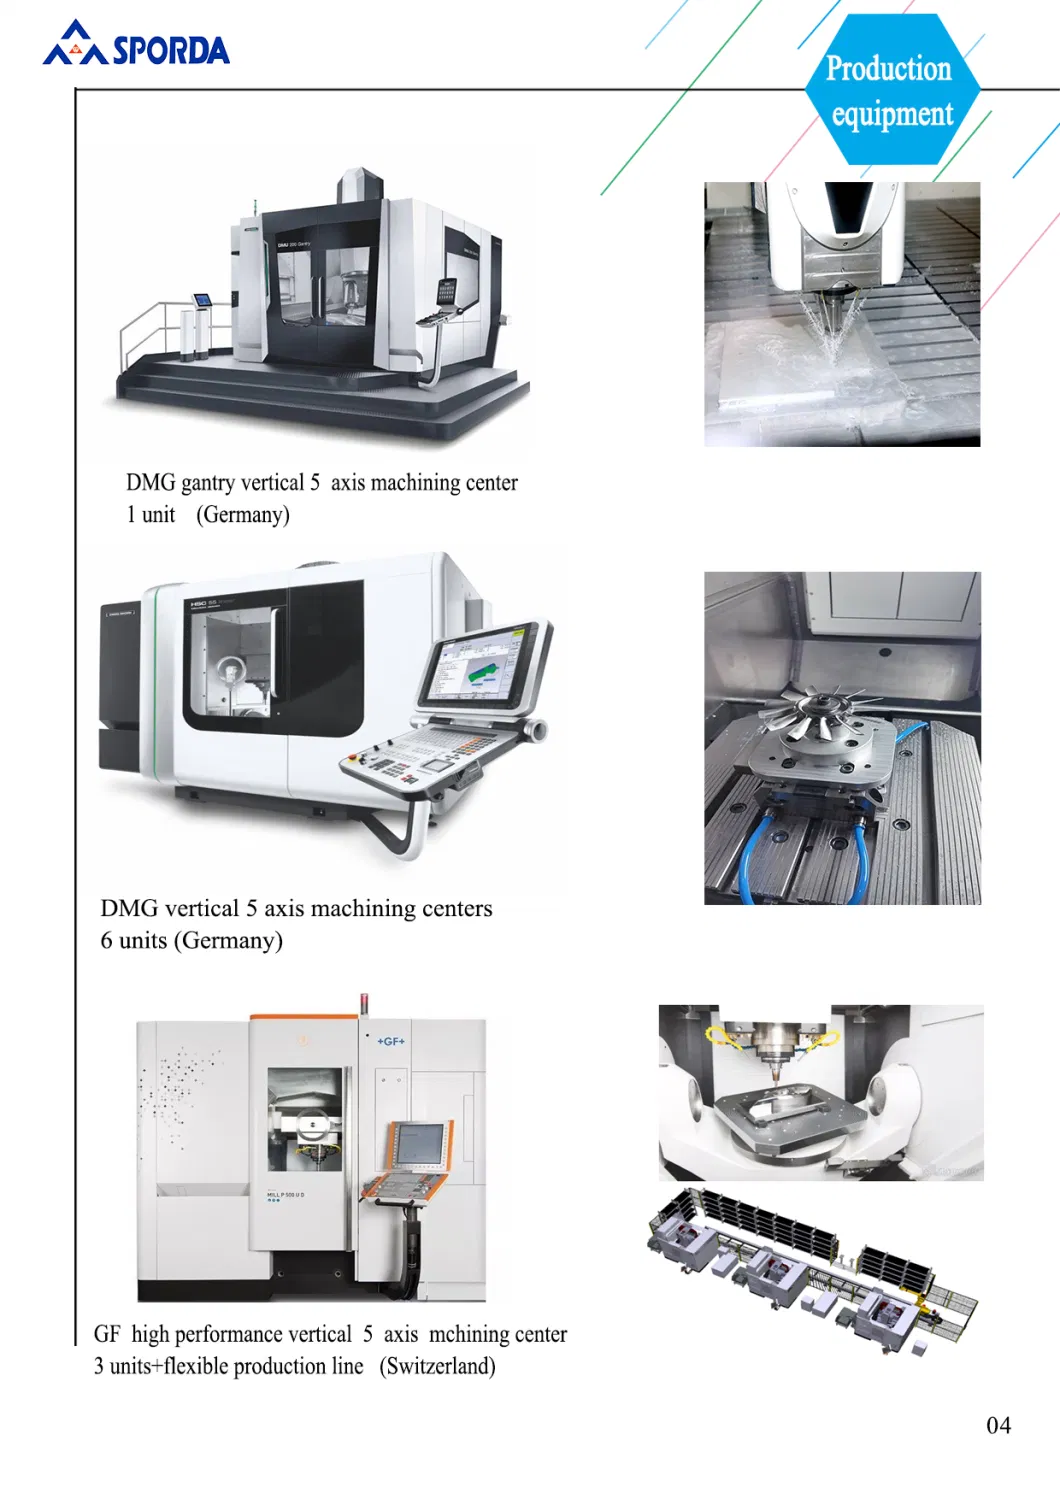 Advanced CNC Prototyping Design High-Quality Aluminum Prototyping Services